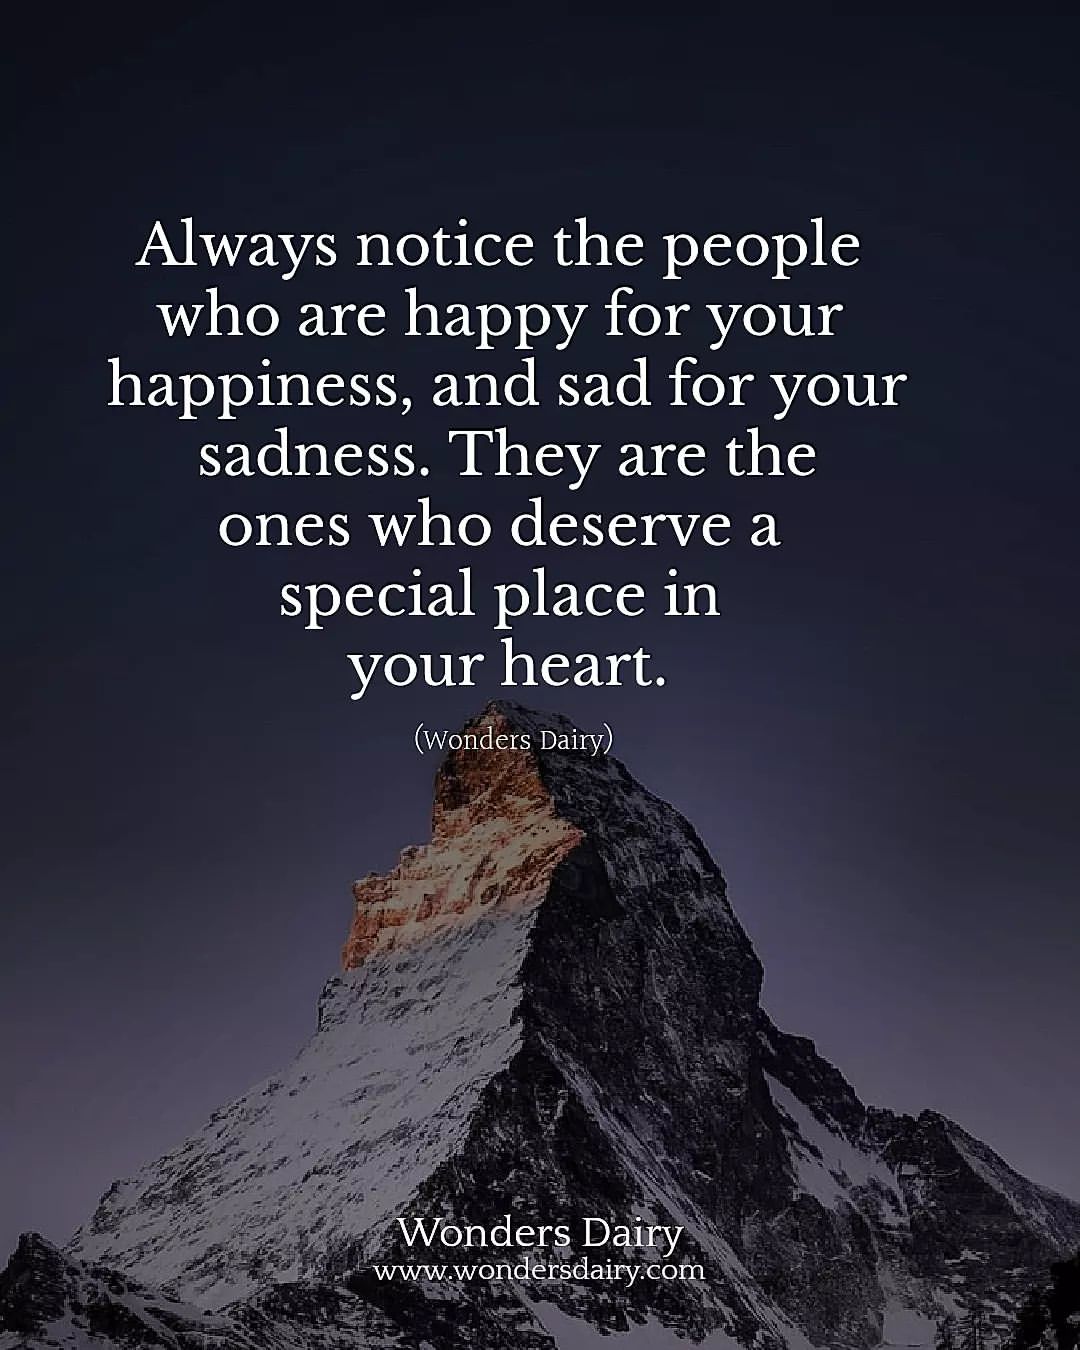 Always notice the people who are happy for your happiness, and sad for your sadness. They are the ones who deserve a special place in your heart.